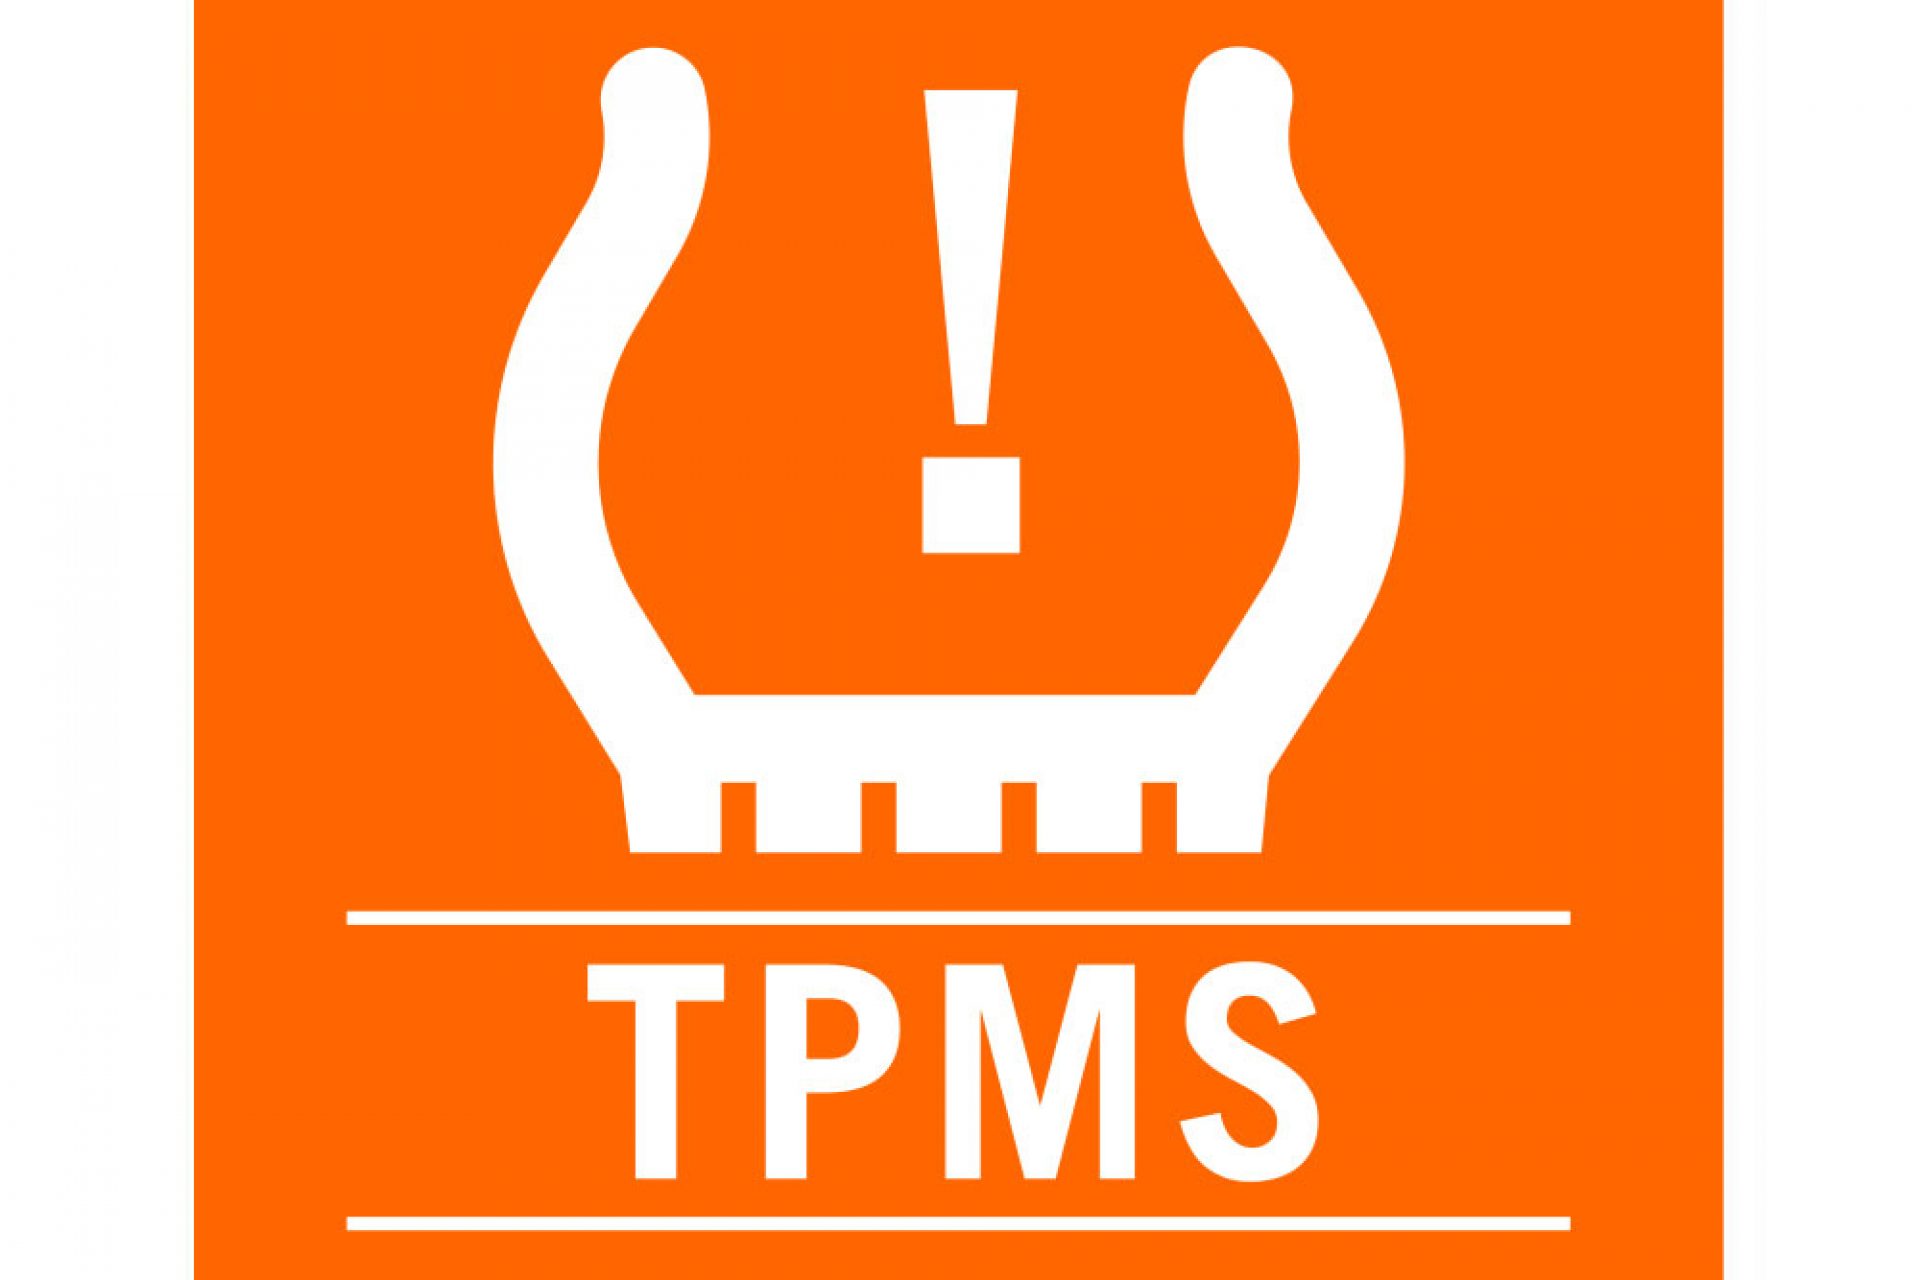 TPMS (TIRE PRESSURE MONITORING SYSTEM)